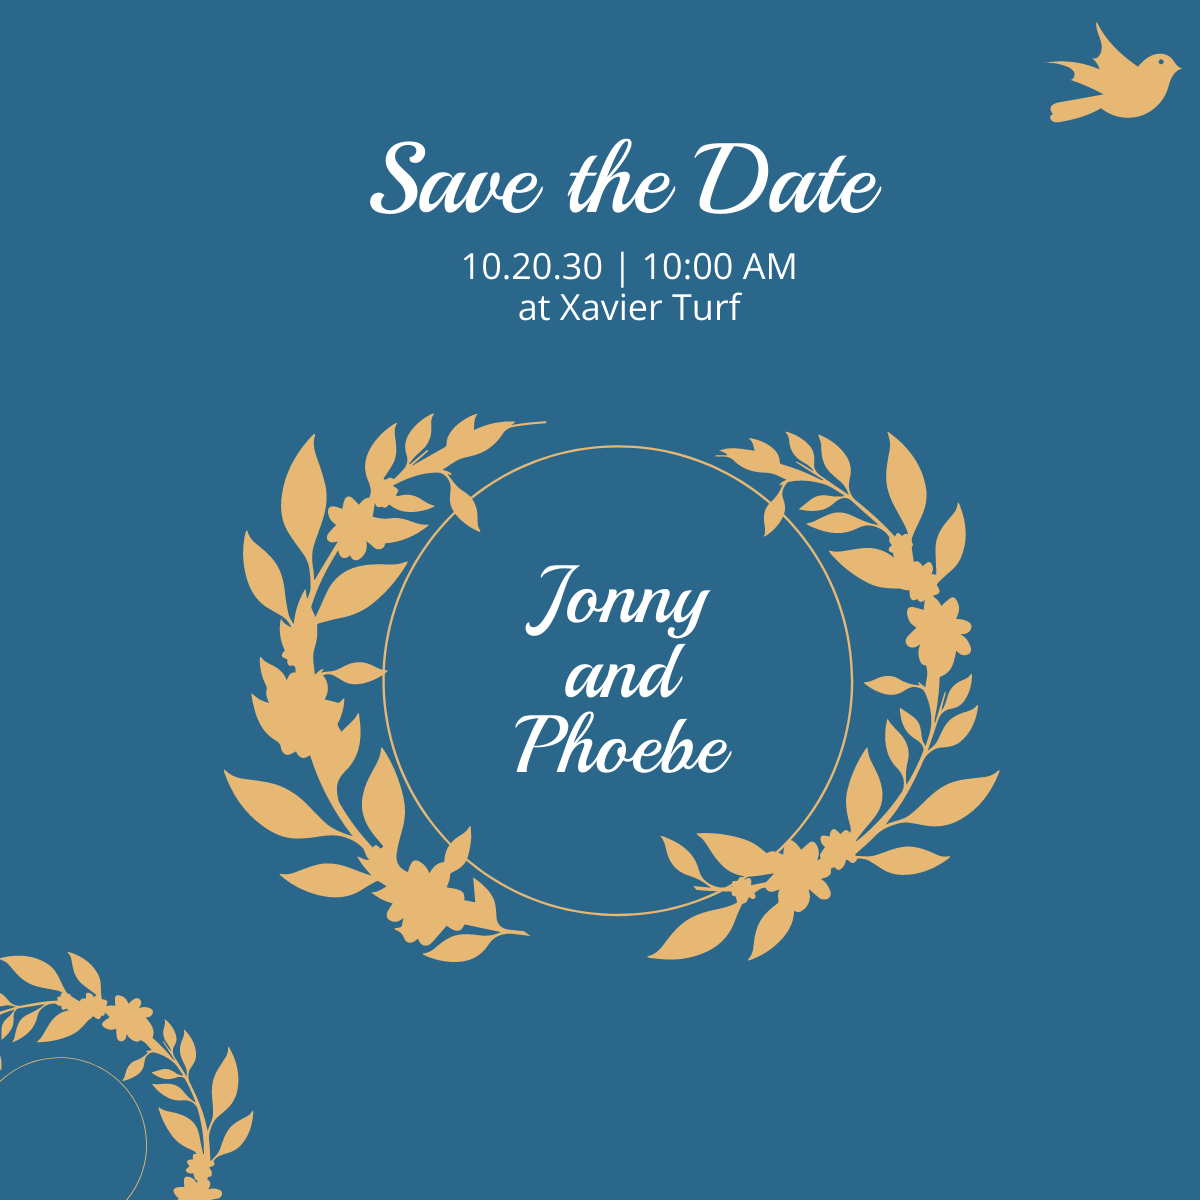 Save The Date Linkedin Post Template